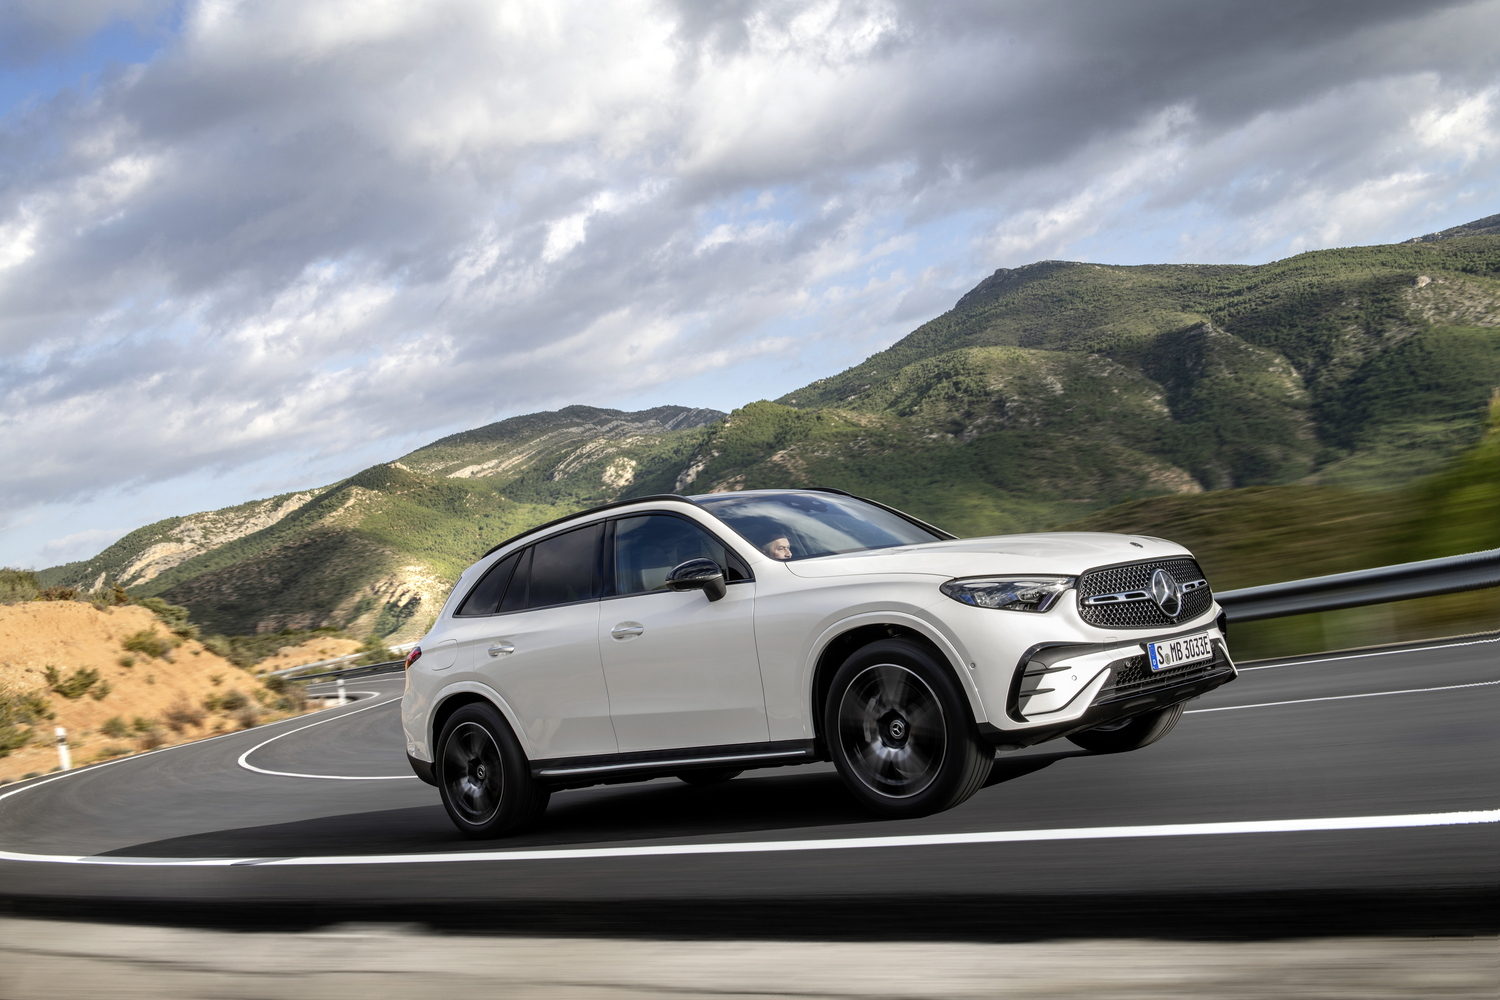 New Mercedes-Benz GLC has arrived in Ireland